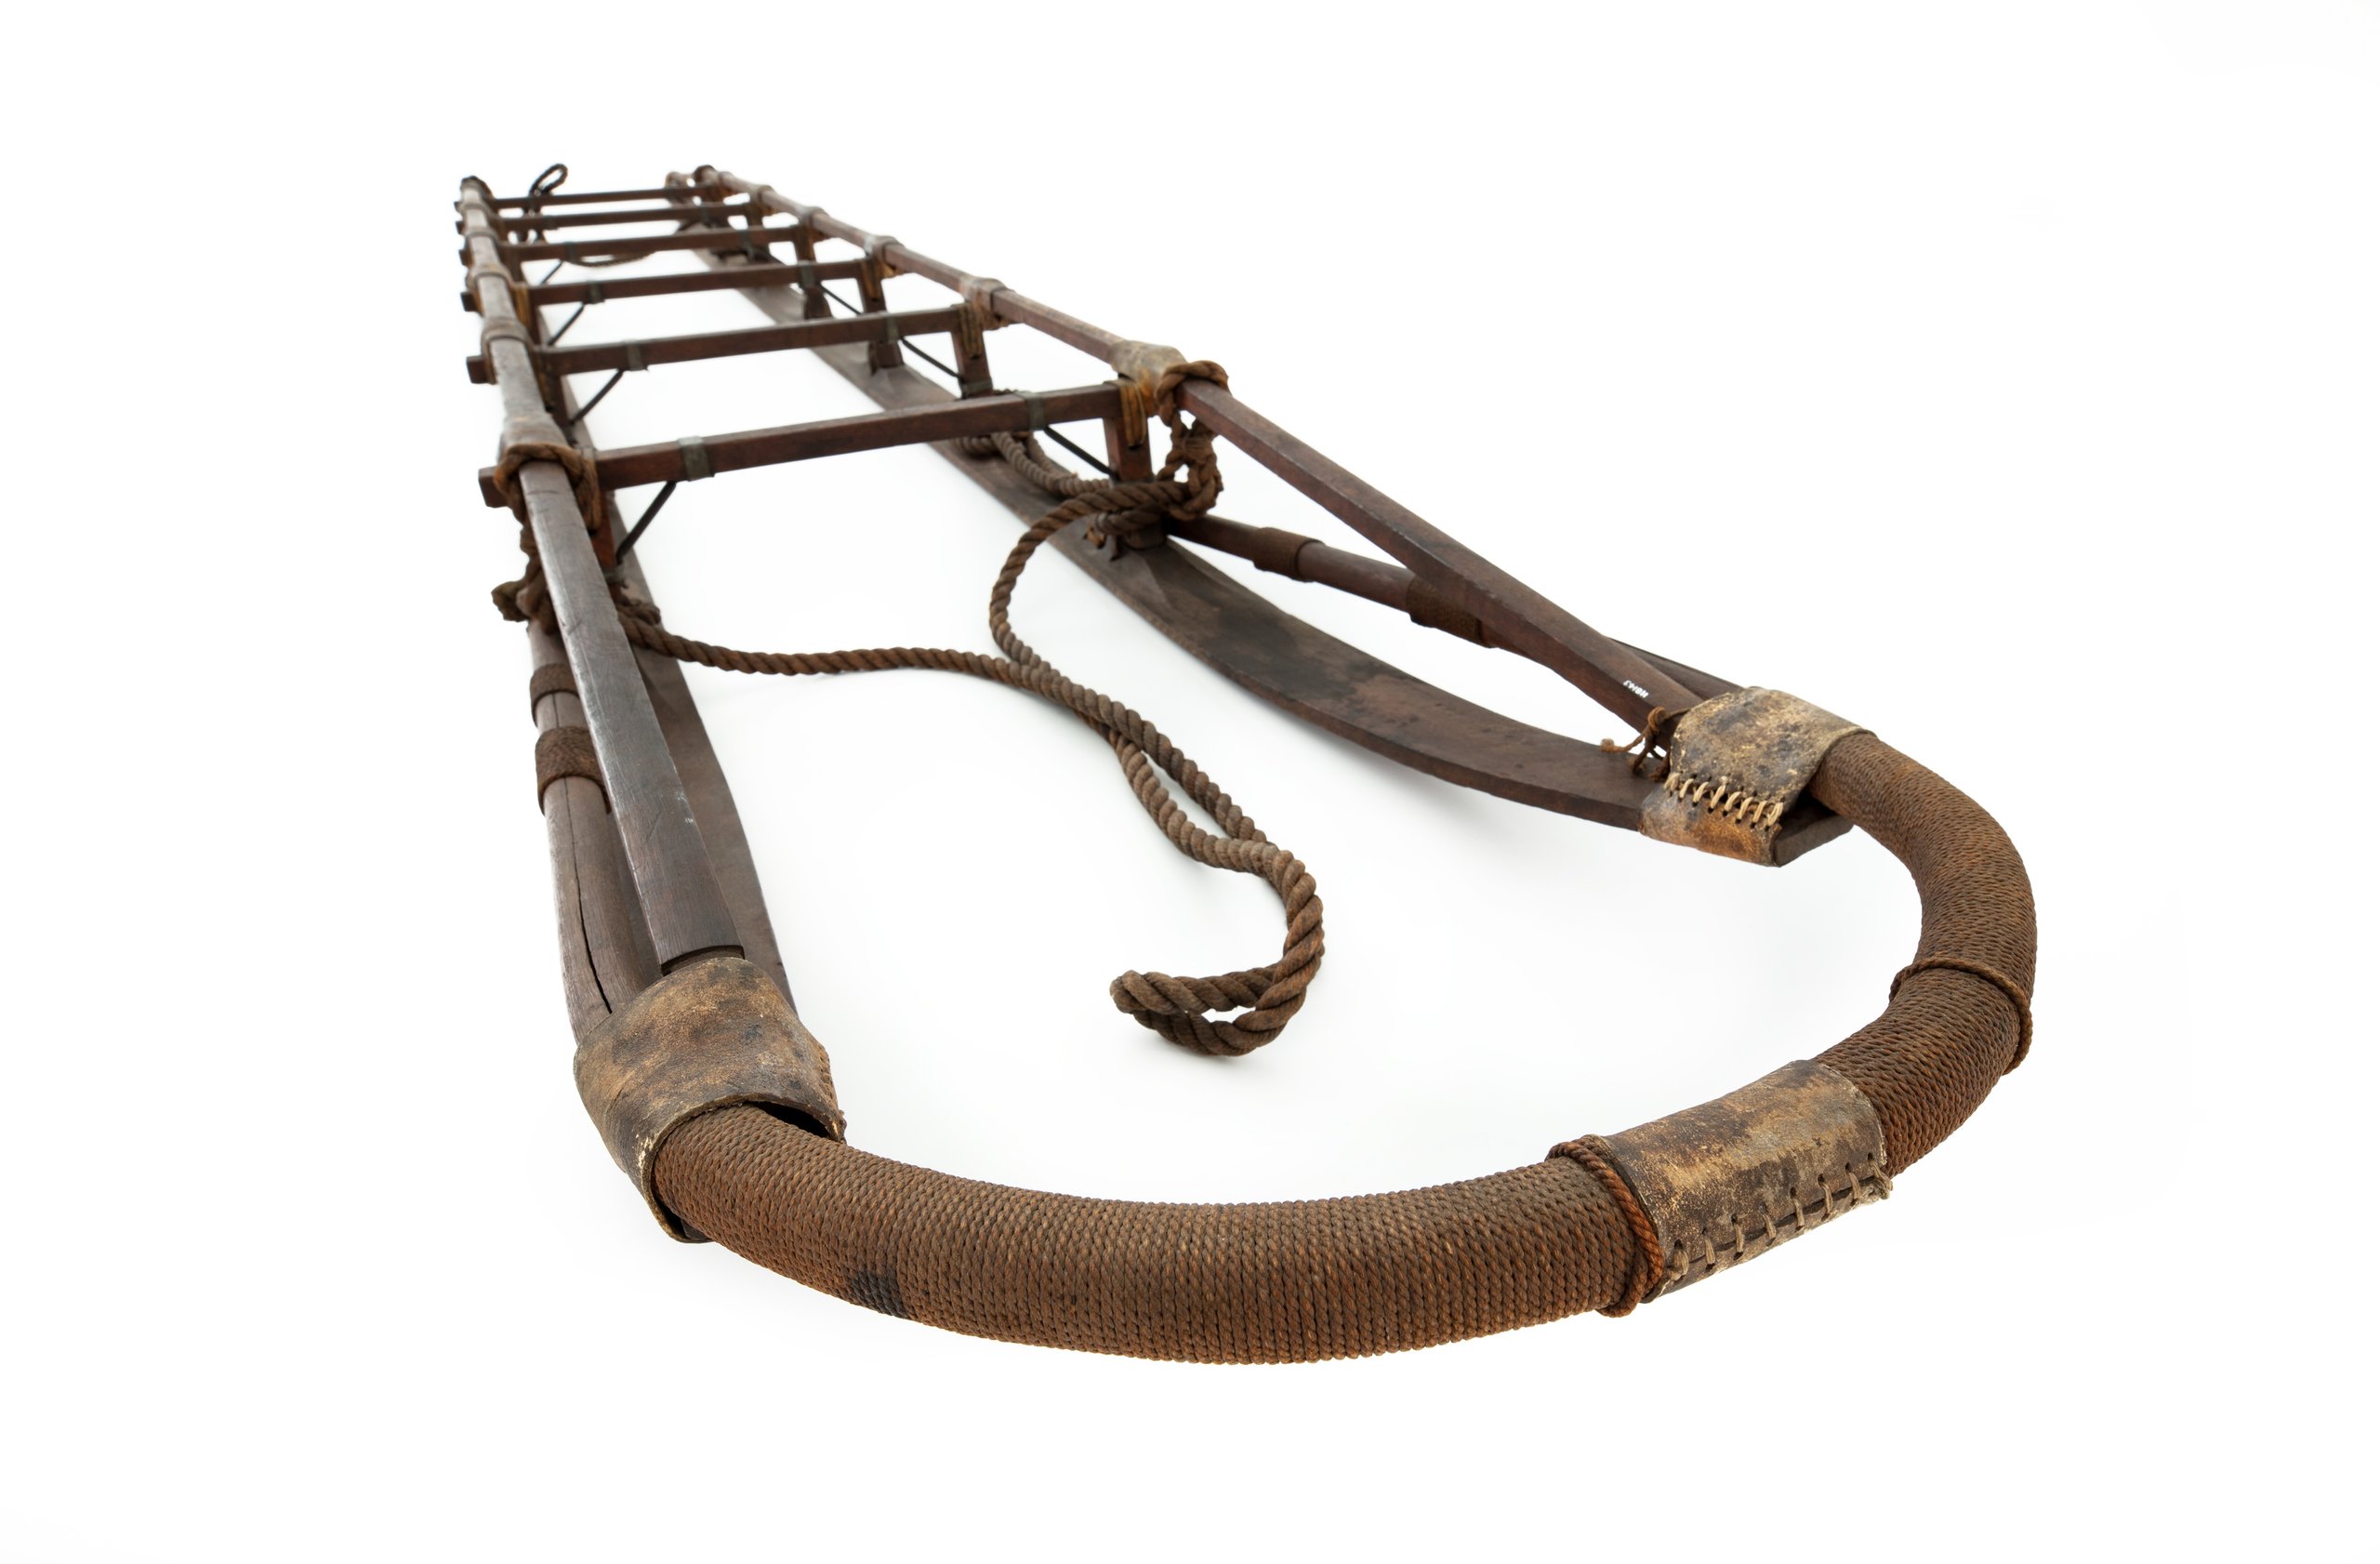 Antarctic sledge used by Sir Douglas Mawson on the Australasian Antarctic Expedition